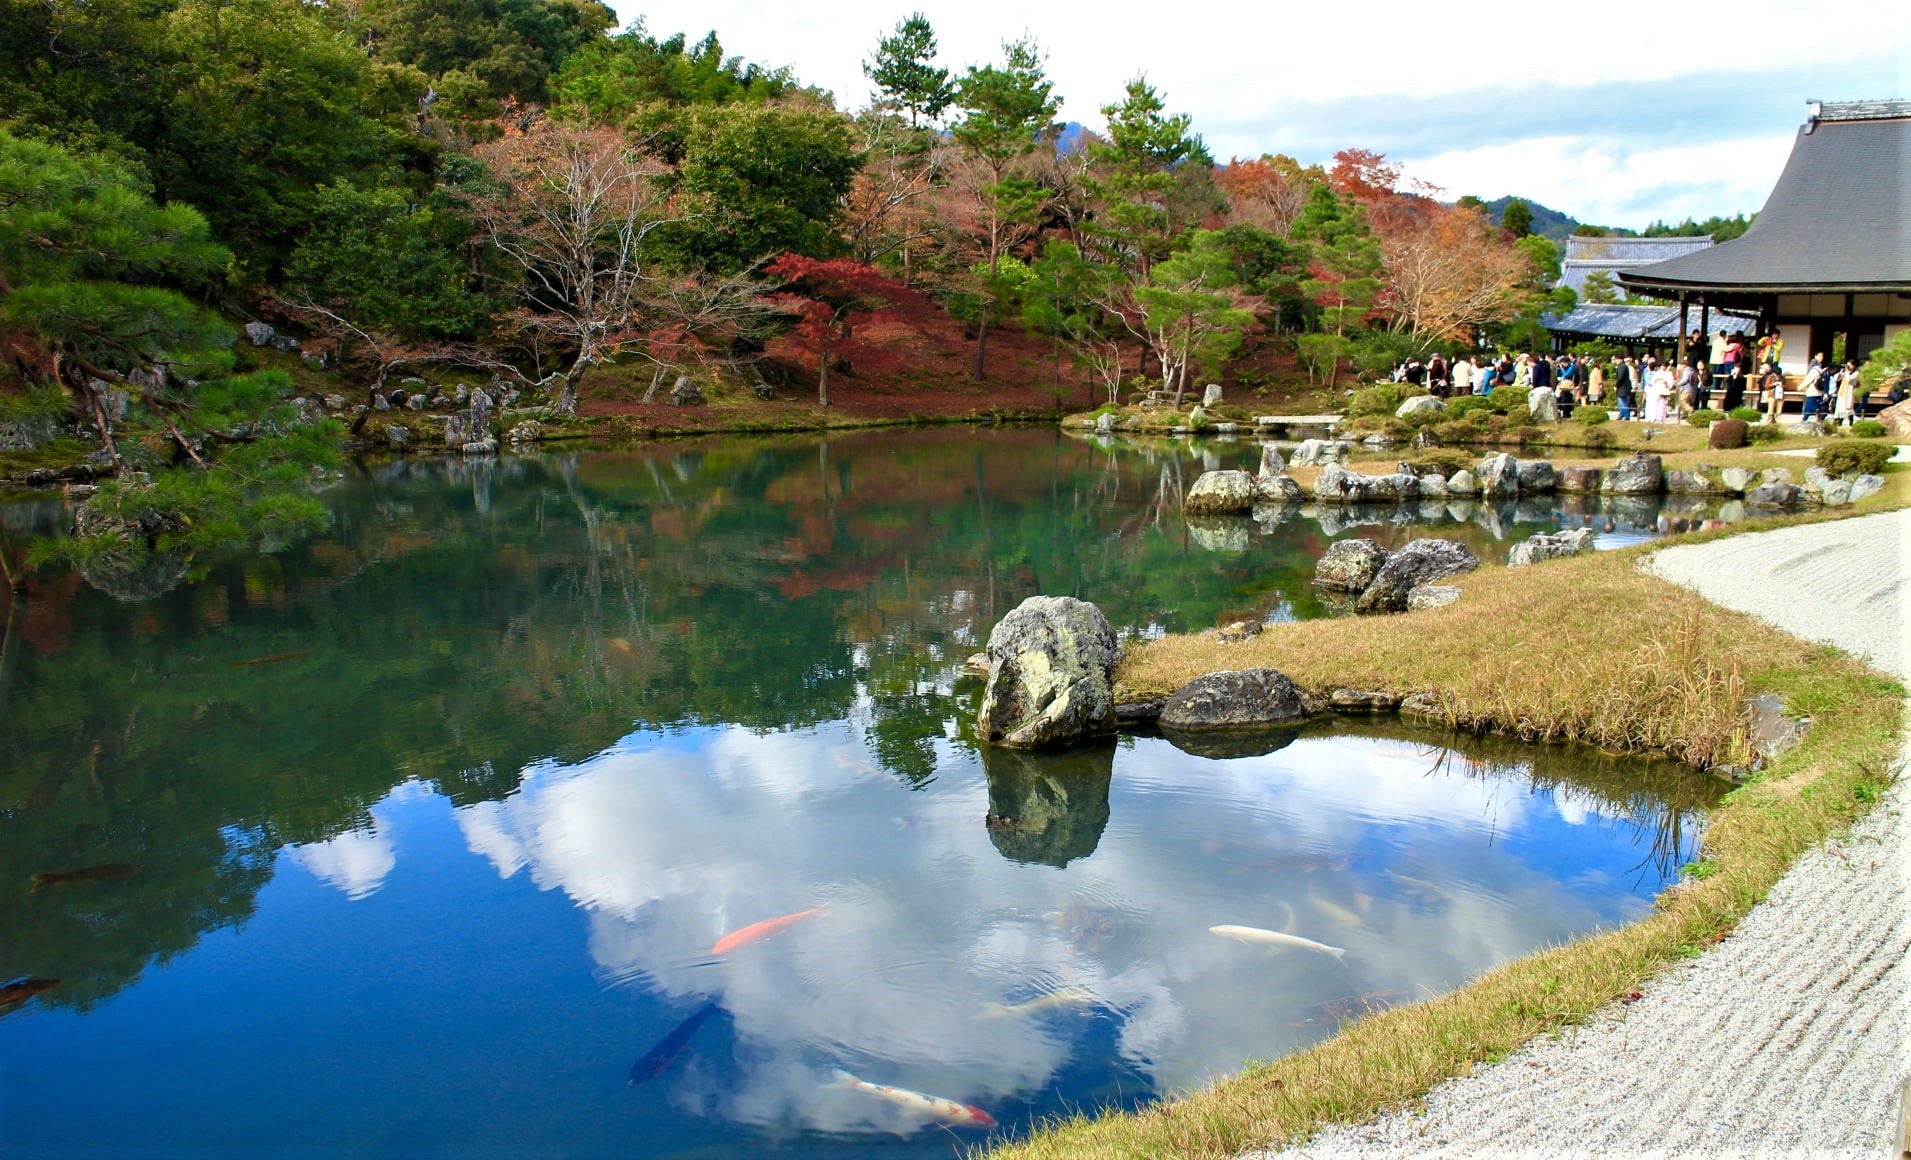 The landscape garden with pond at Tenryuji Temple